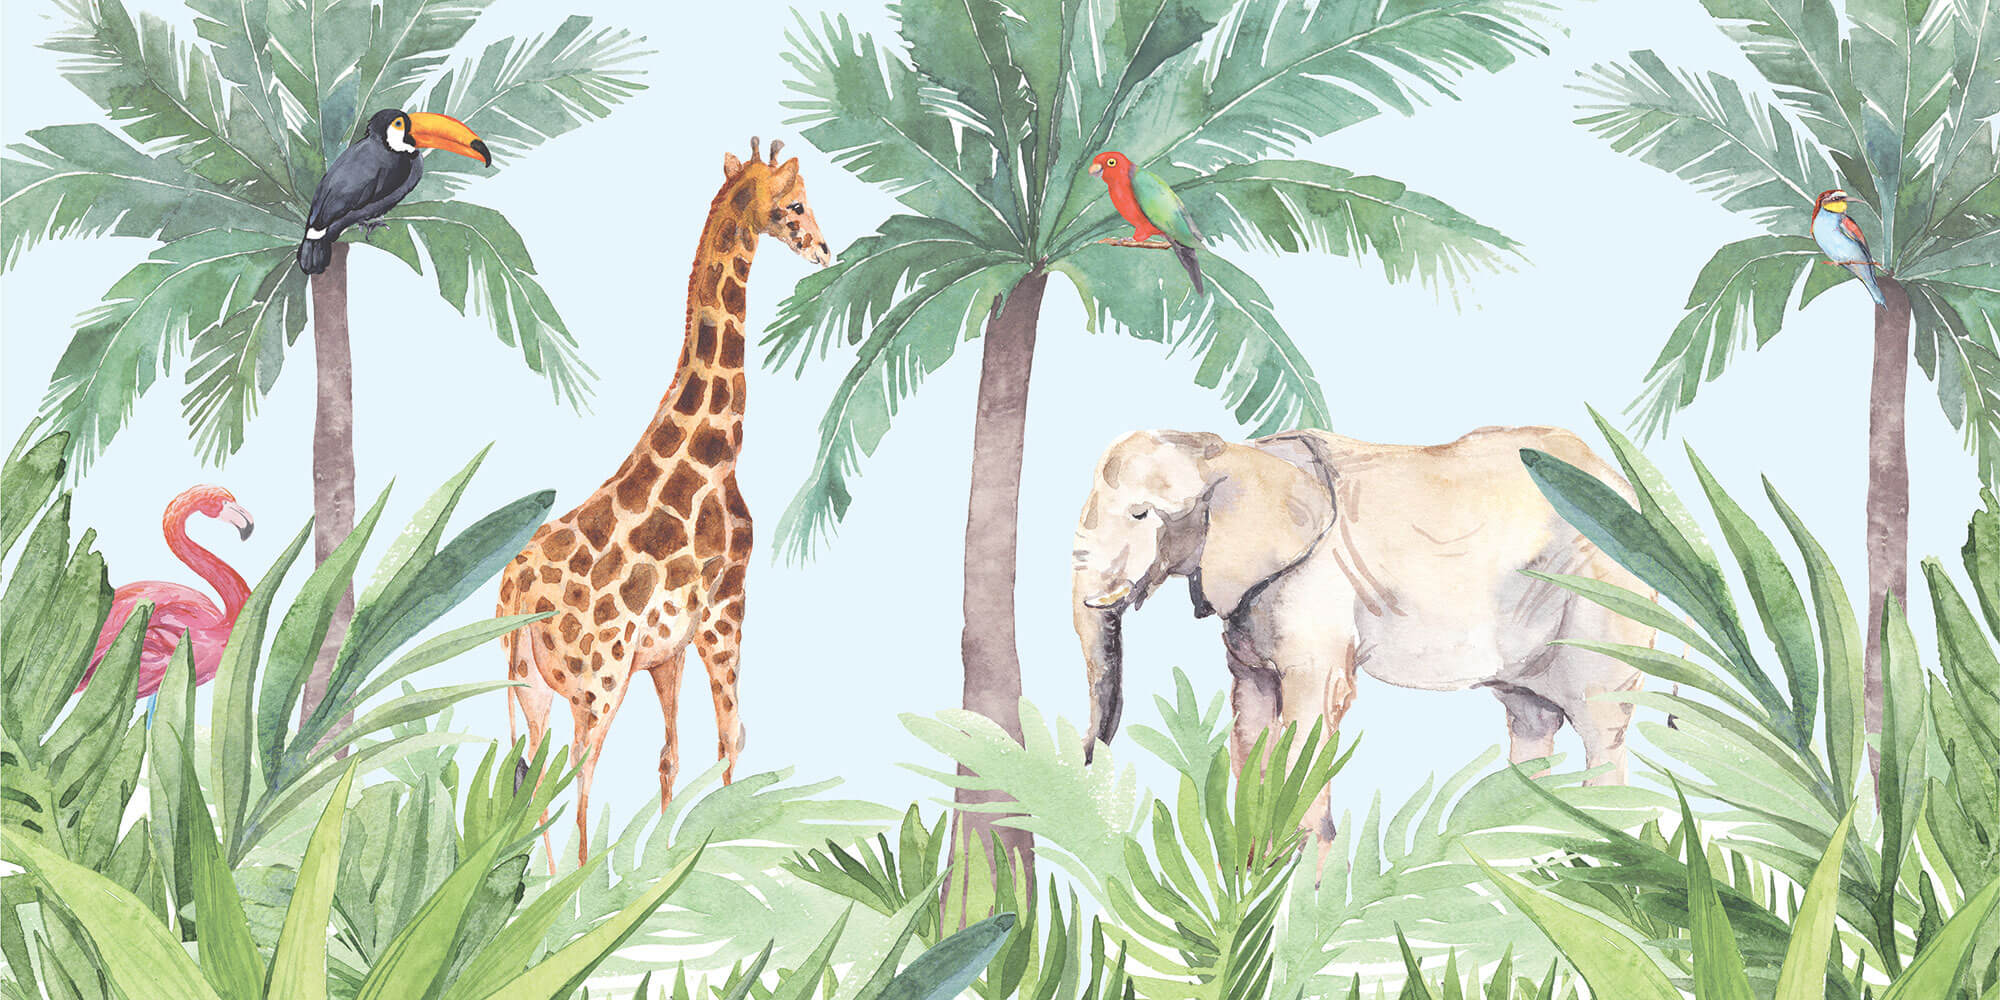 A whimsical watercolor illustration for a wallpaper design featuring a vibrant jungle scene with a towering giraffe, a majestic elephant, and a flamboyance of flamingos amidst lush tropical foliage. Vividly colored birds perch on palm trees under a serene sky.